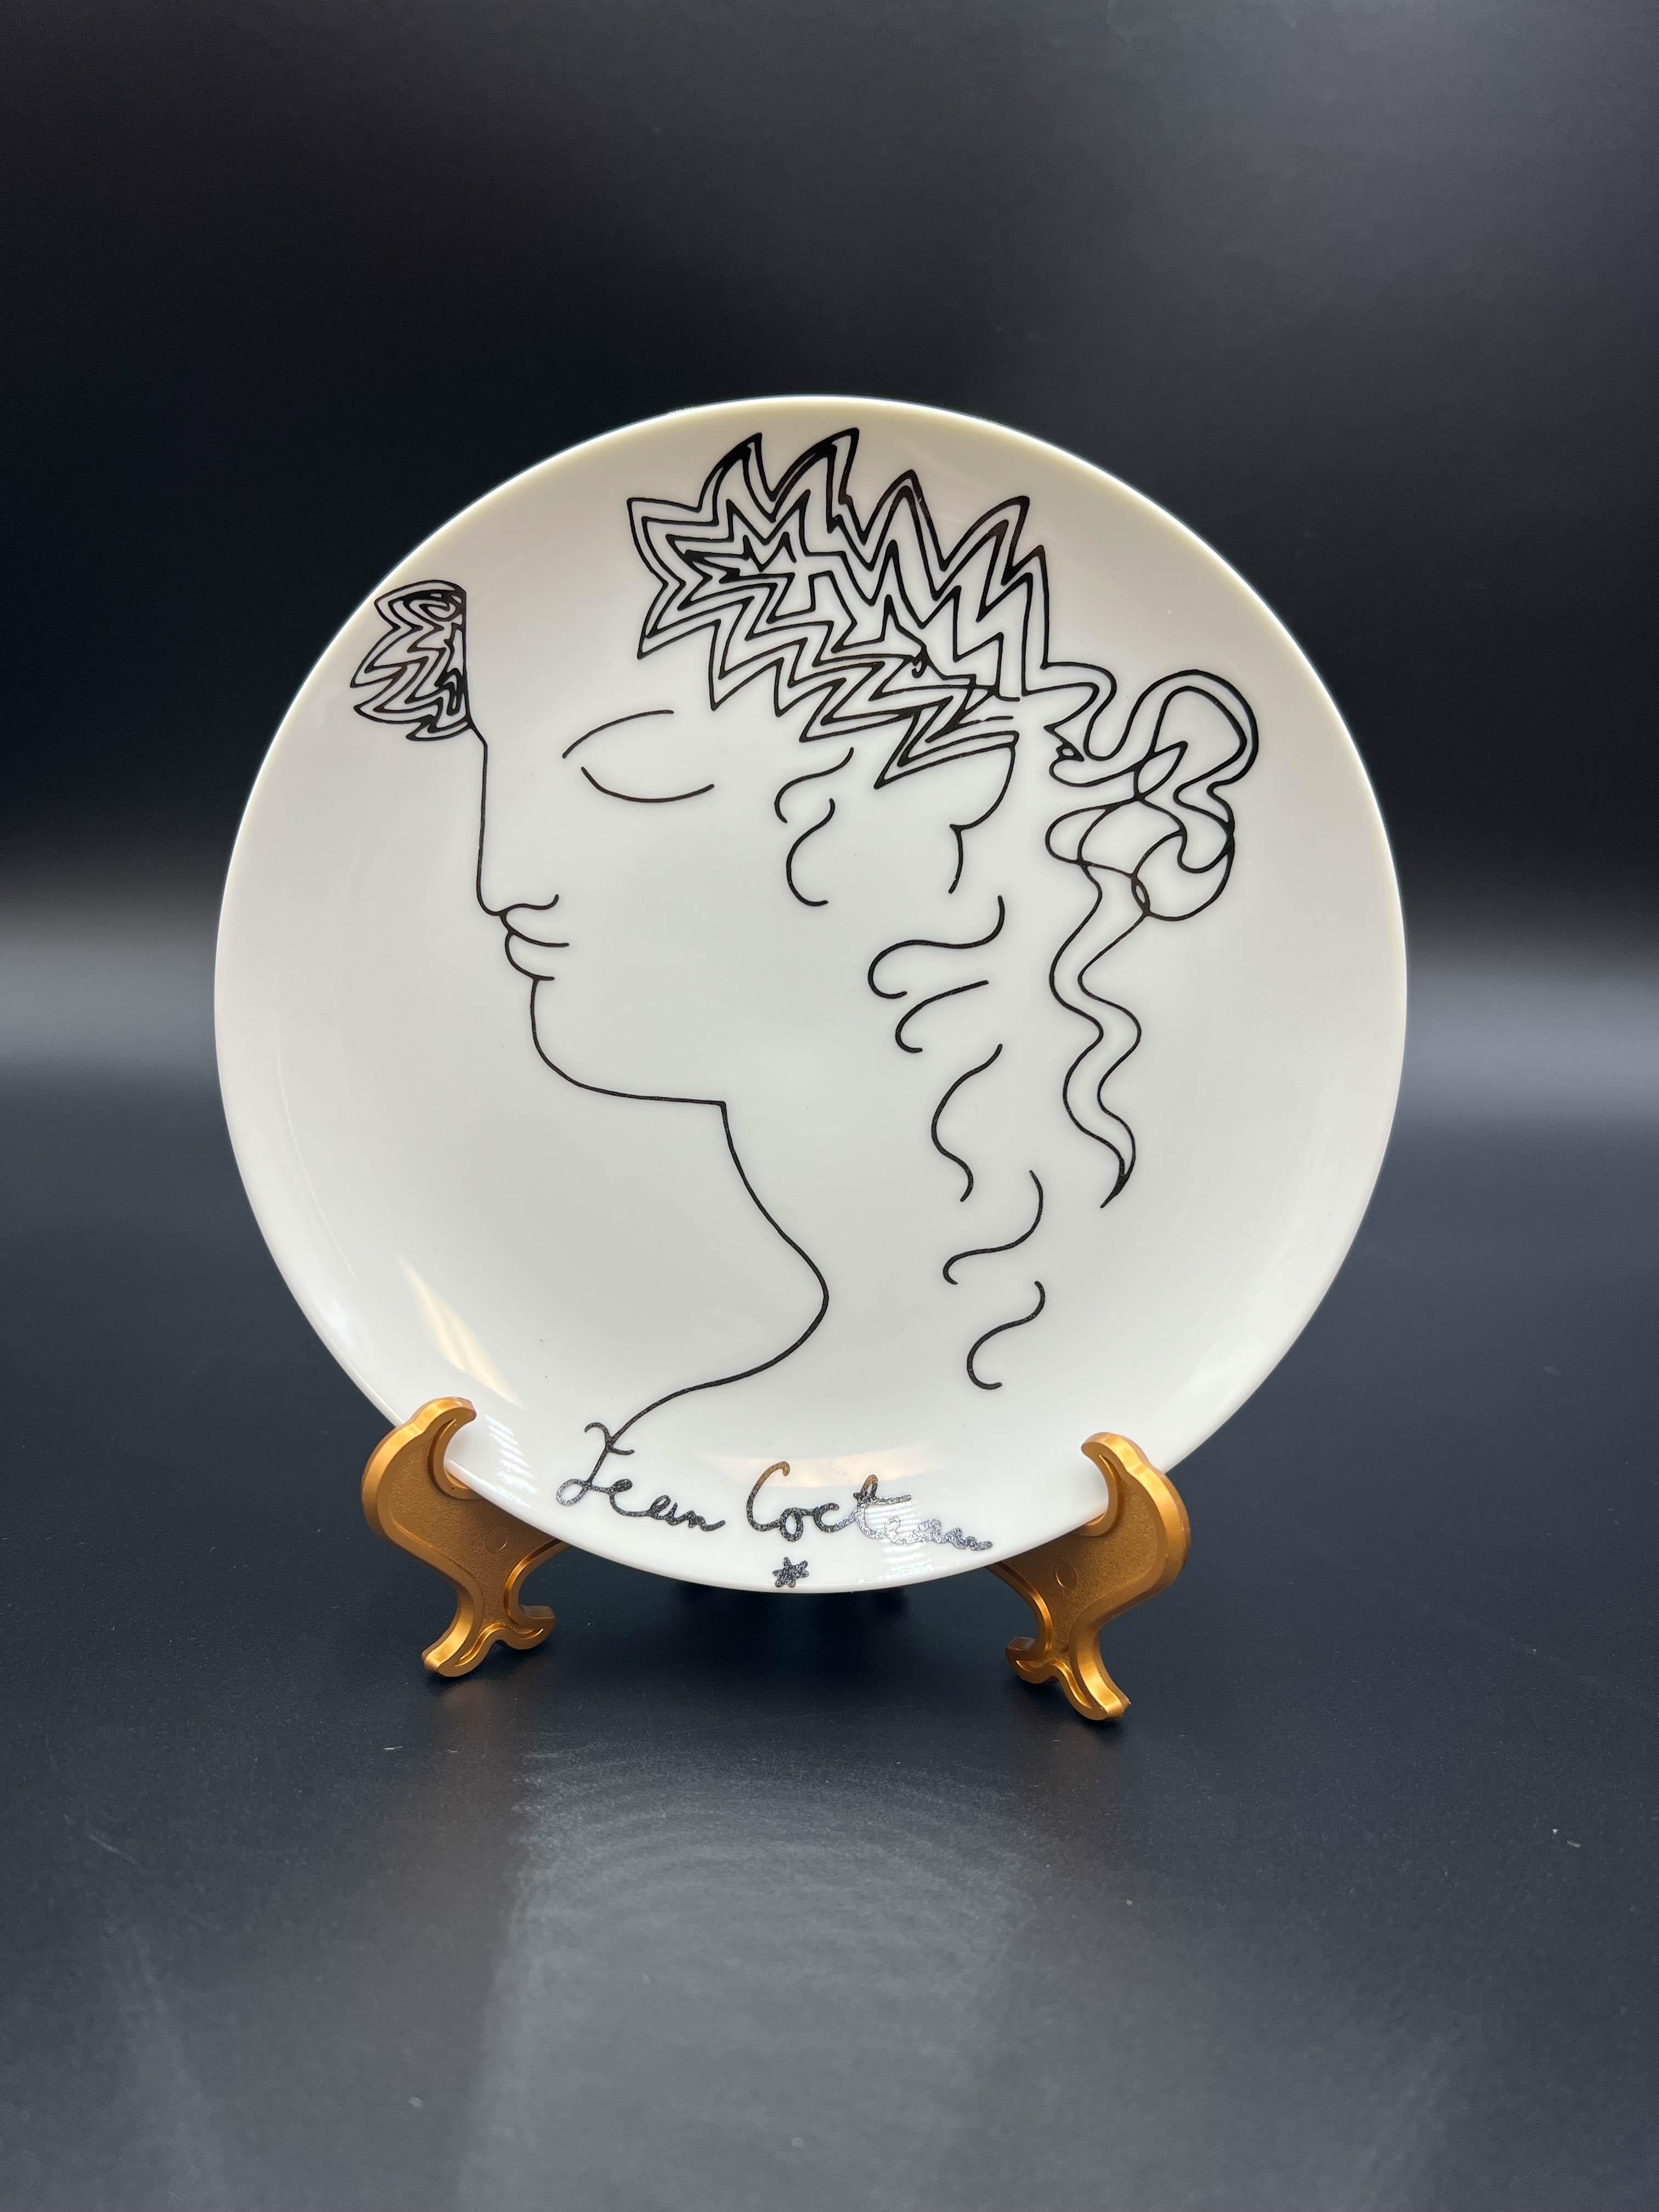 Jean Cocteau Plates by Limoges, 1958 - Set of 4 In Good Condition For Sale In Palm Beach Gardens, FL